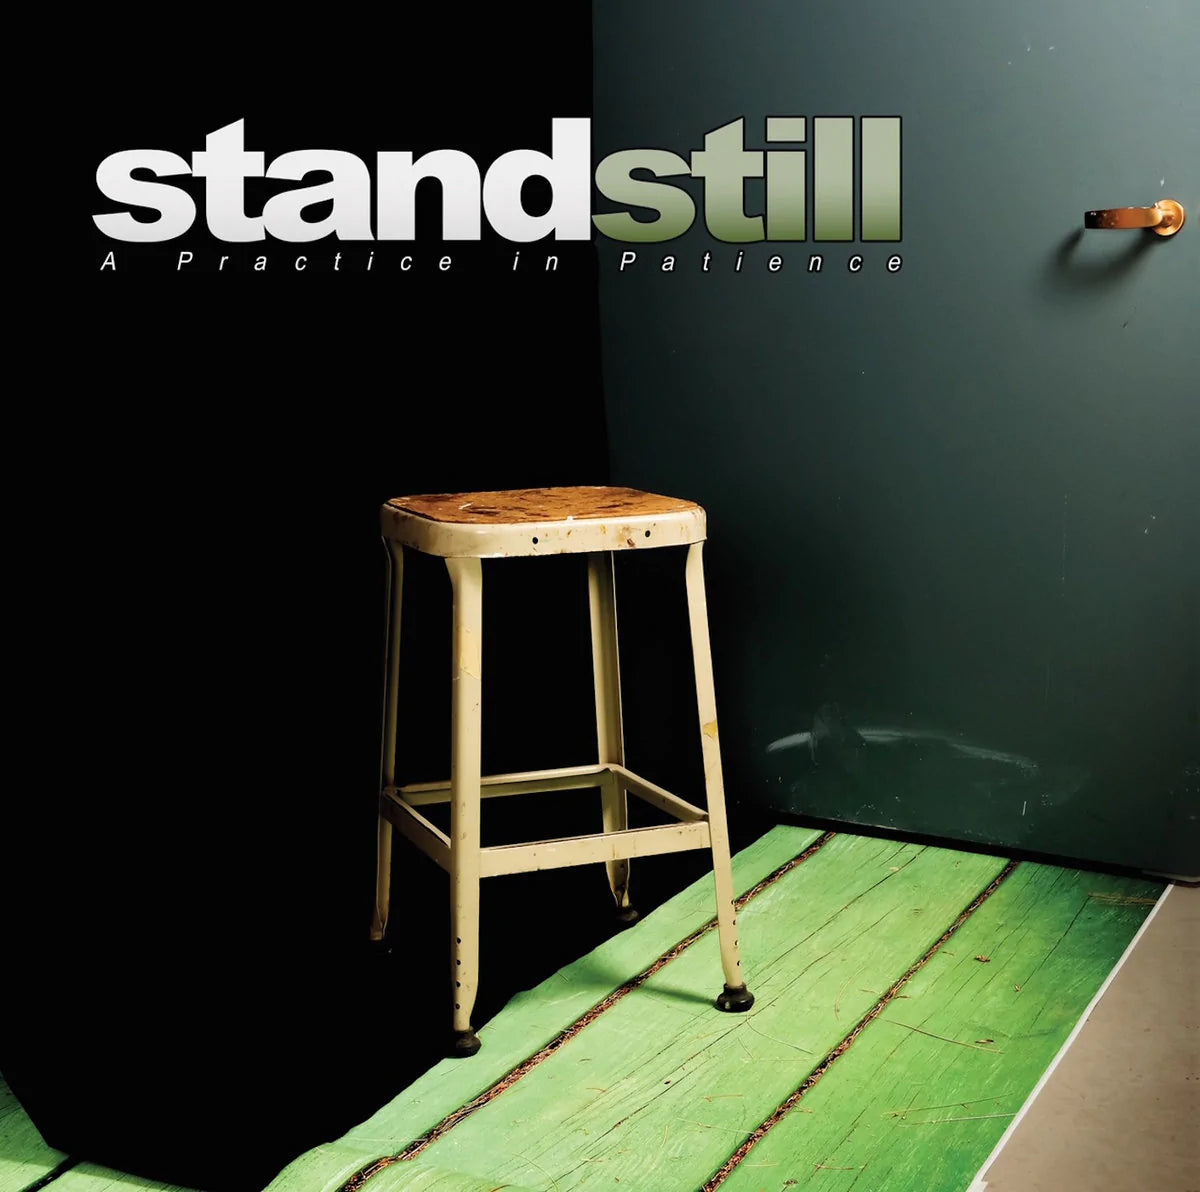 Stand Still "A Practice in Patience" 12" Vinyl